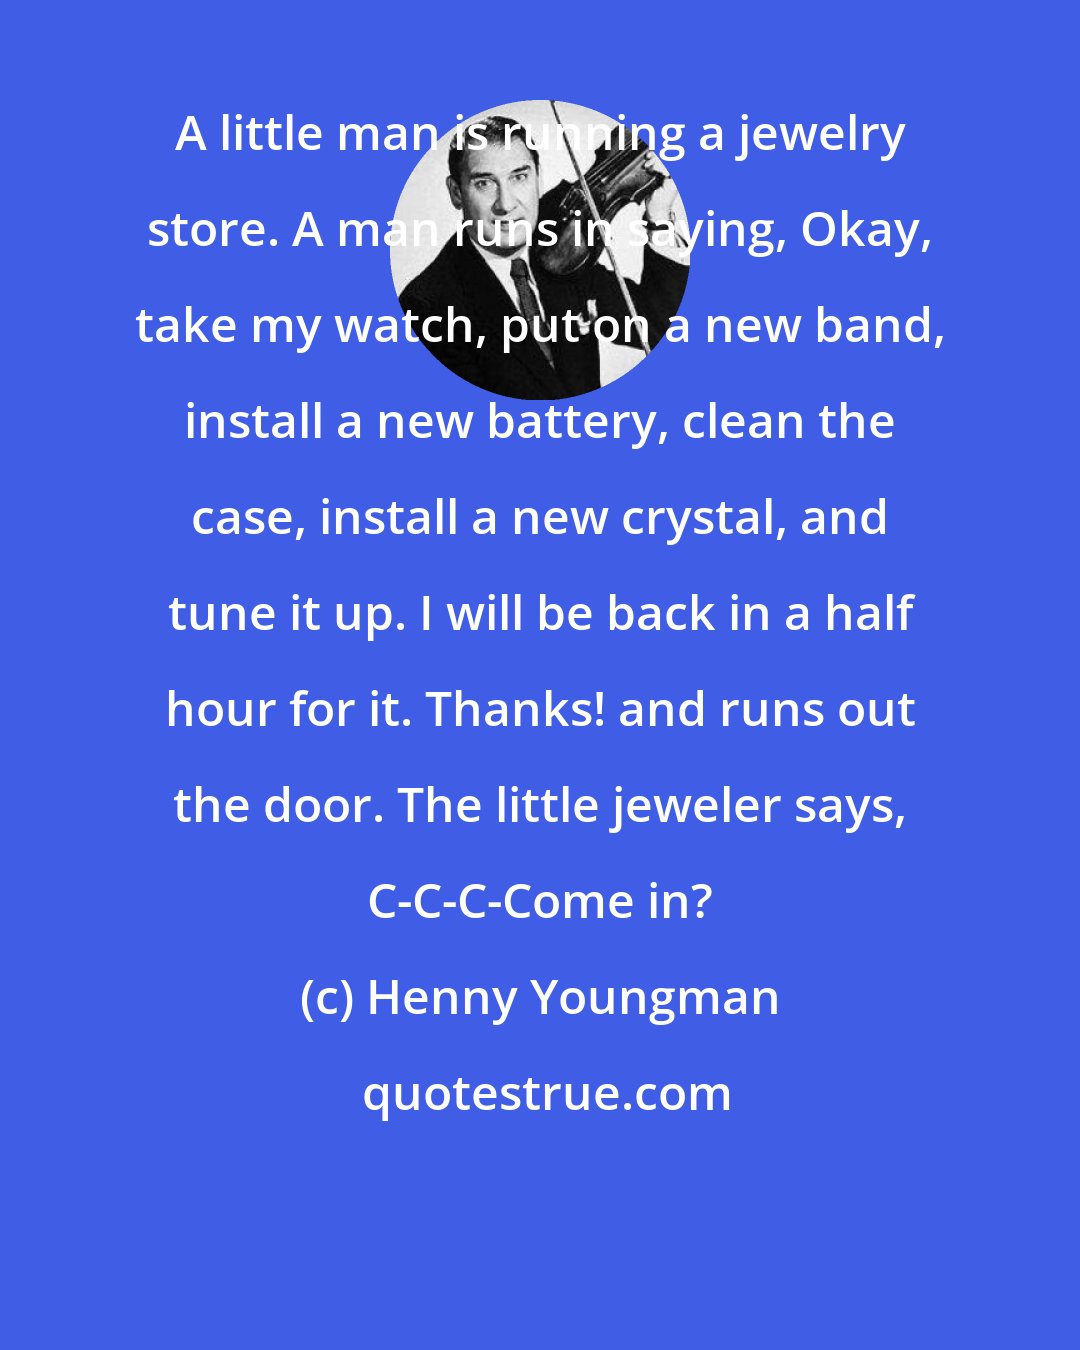 Henny Youngman: A little man is running a jewelry store. A man runs in saying, Okay, take my watch, put on a new band, install a new battery, clean the case, install a new crystal, and tune it up. I will be back in a half hour for it. Thanks! and runs out the door. The little jeweler says, C-C-C-Come in?